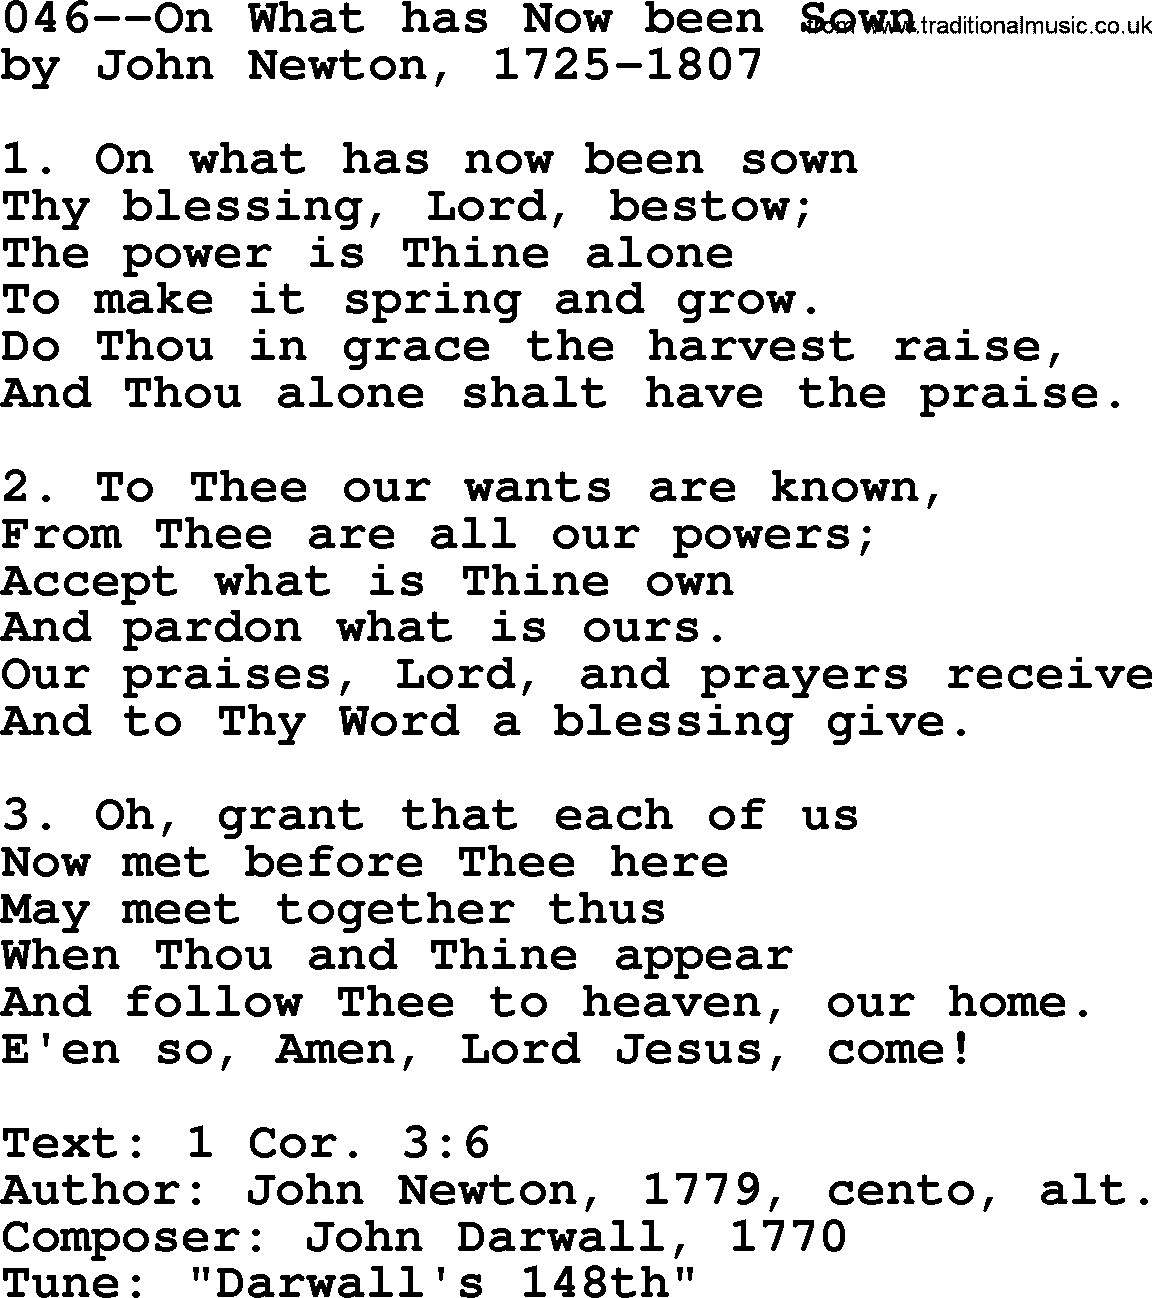 Lutheran Hymn: 046--On What has Now been Sown.txt lyrics with PDF